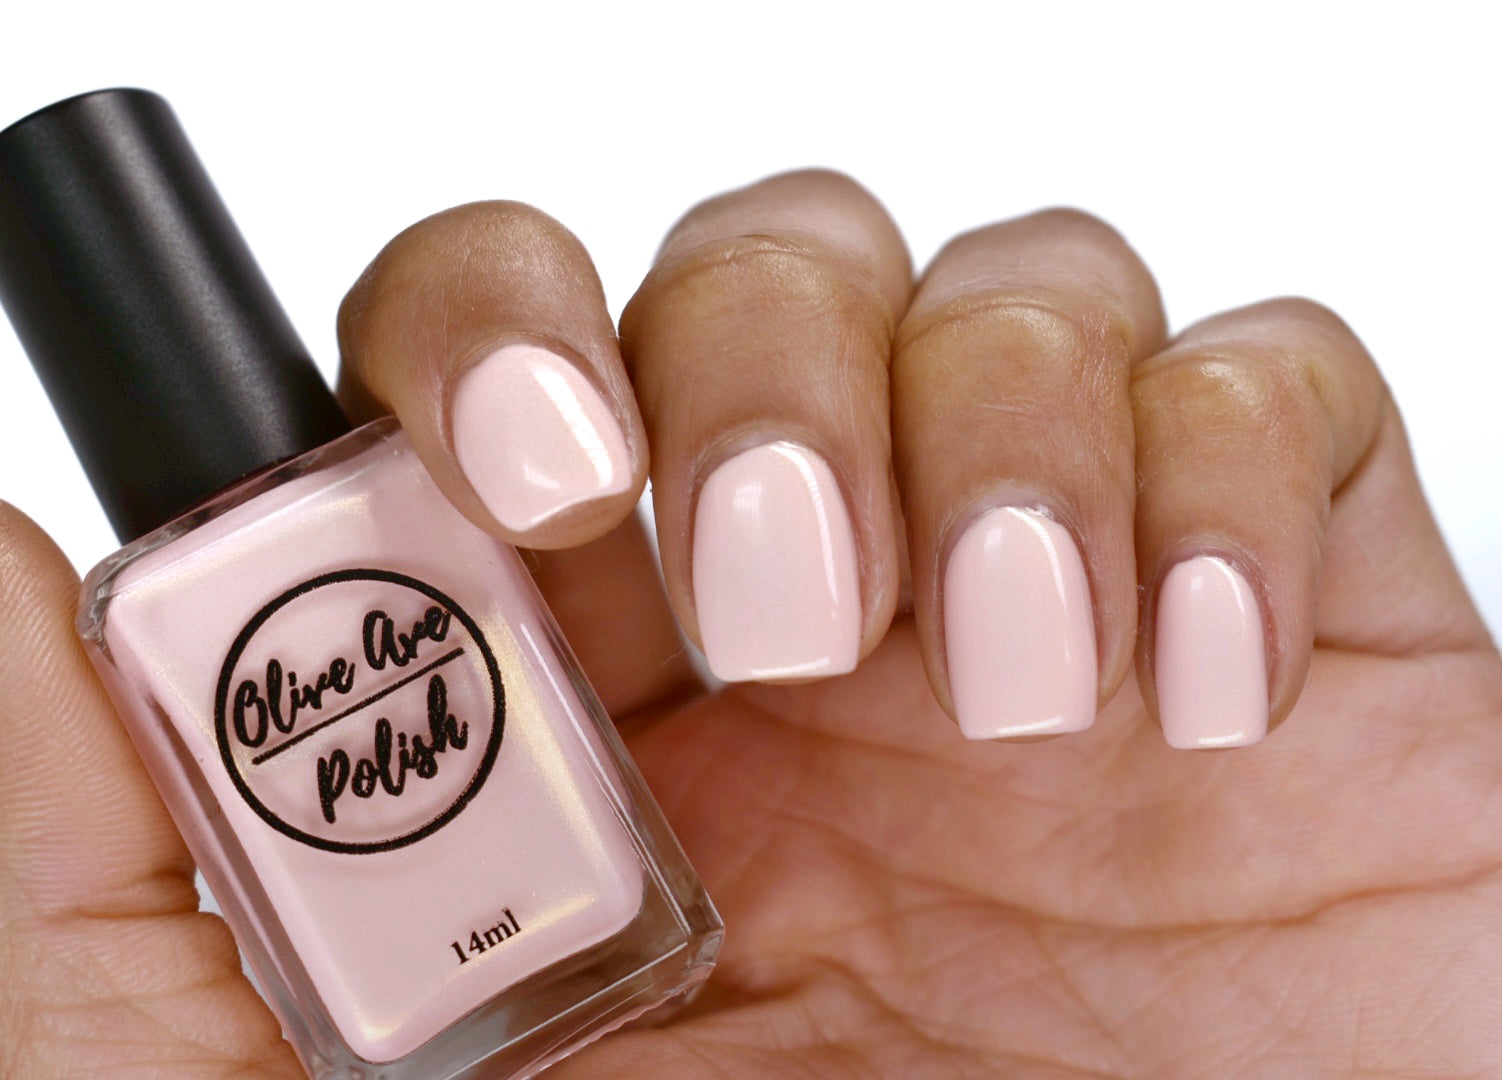 Pink nail polish with gold shimmer swatch on pale skin tone